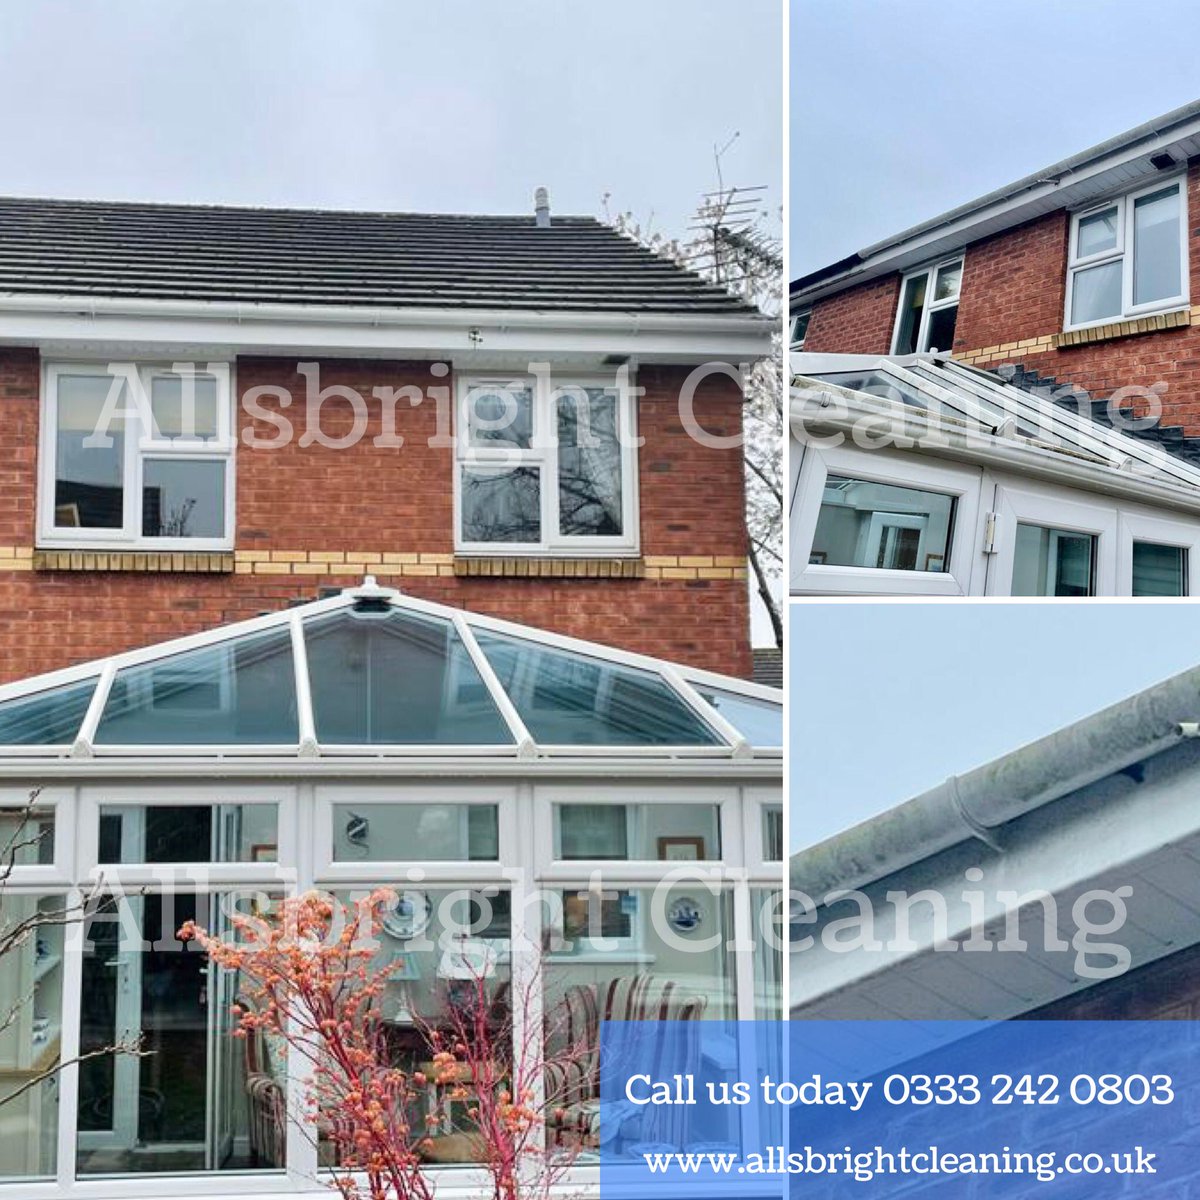 Zoom in and see the difference ✨ 

Call today and book your free quotation 📞 

#cardiff #abergavenny #cwmbran #exteriorclean #domesticclean #conservatory #conservatoryroof #wednesdaythought #WednesdayMotivation #thismorning